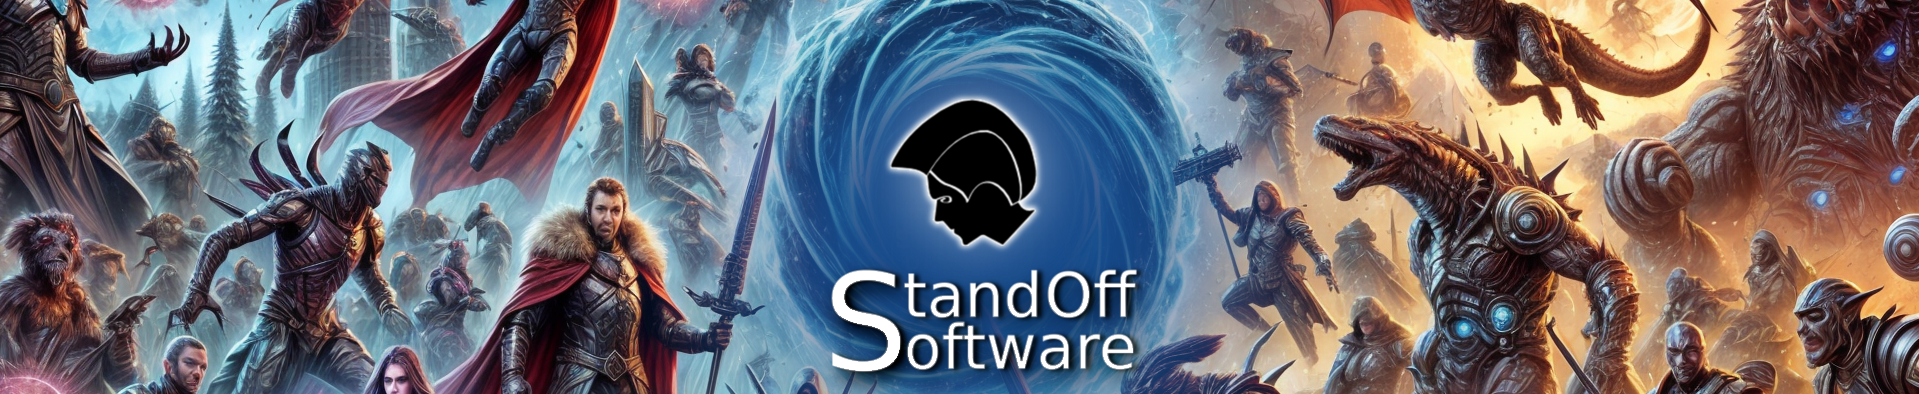 Stand Off Software Hero Image